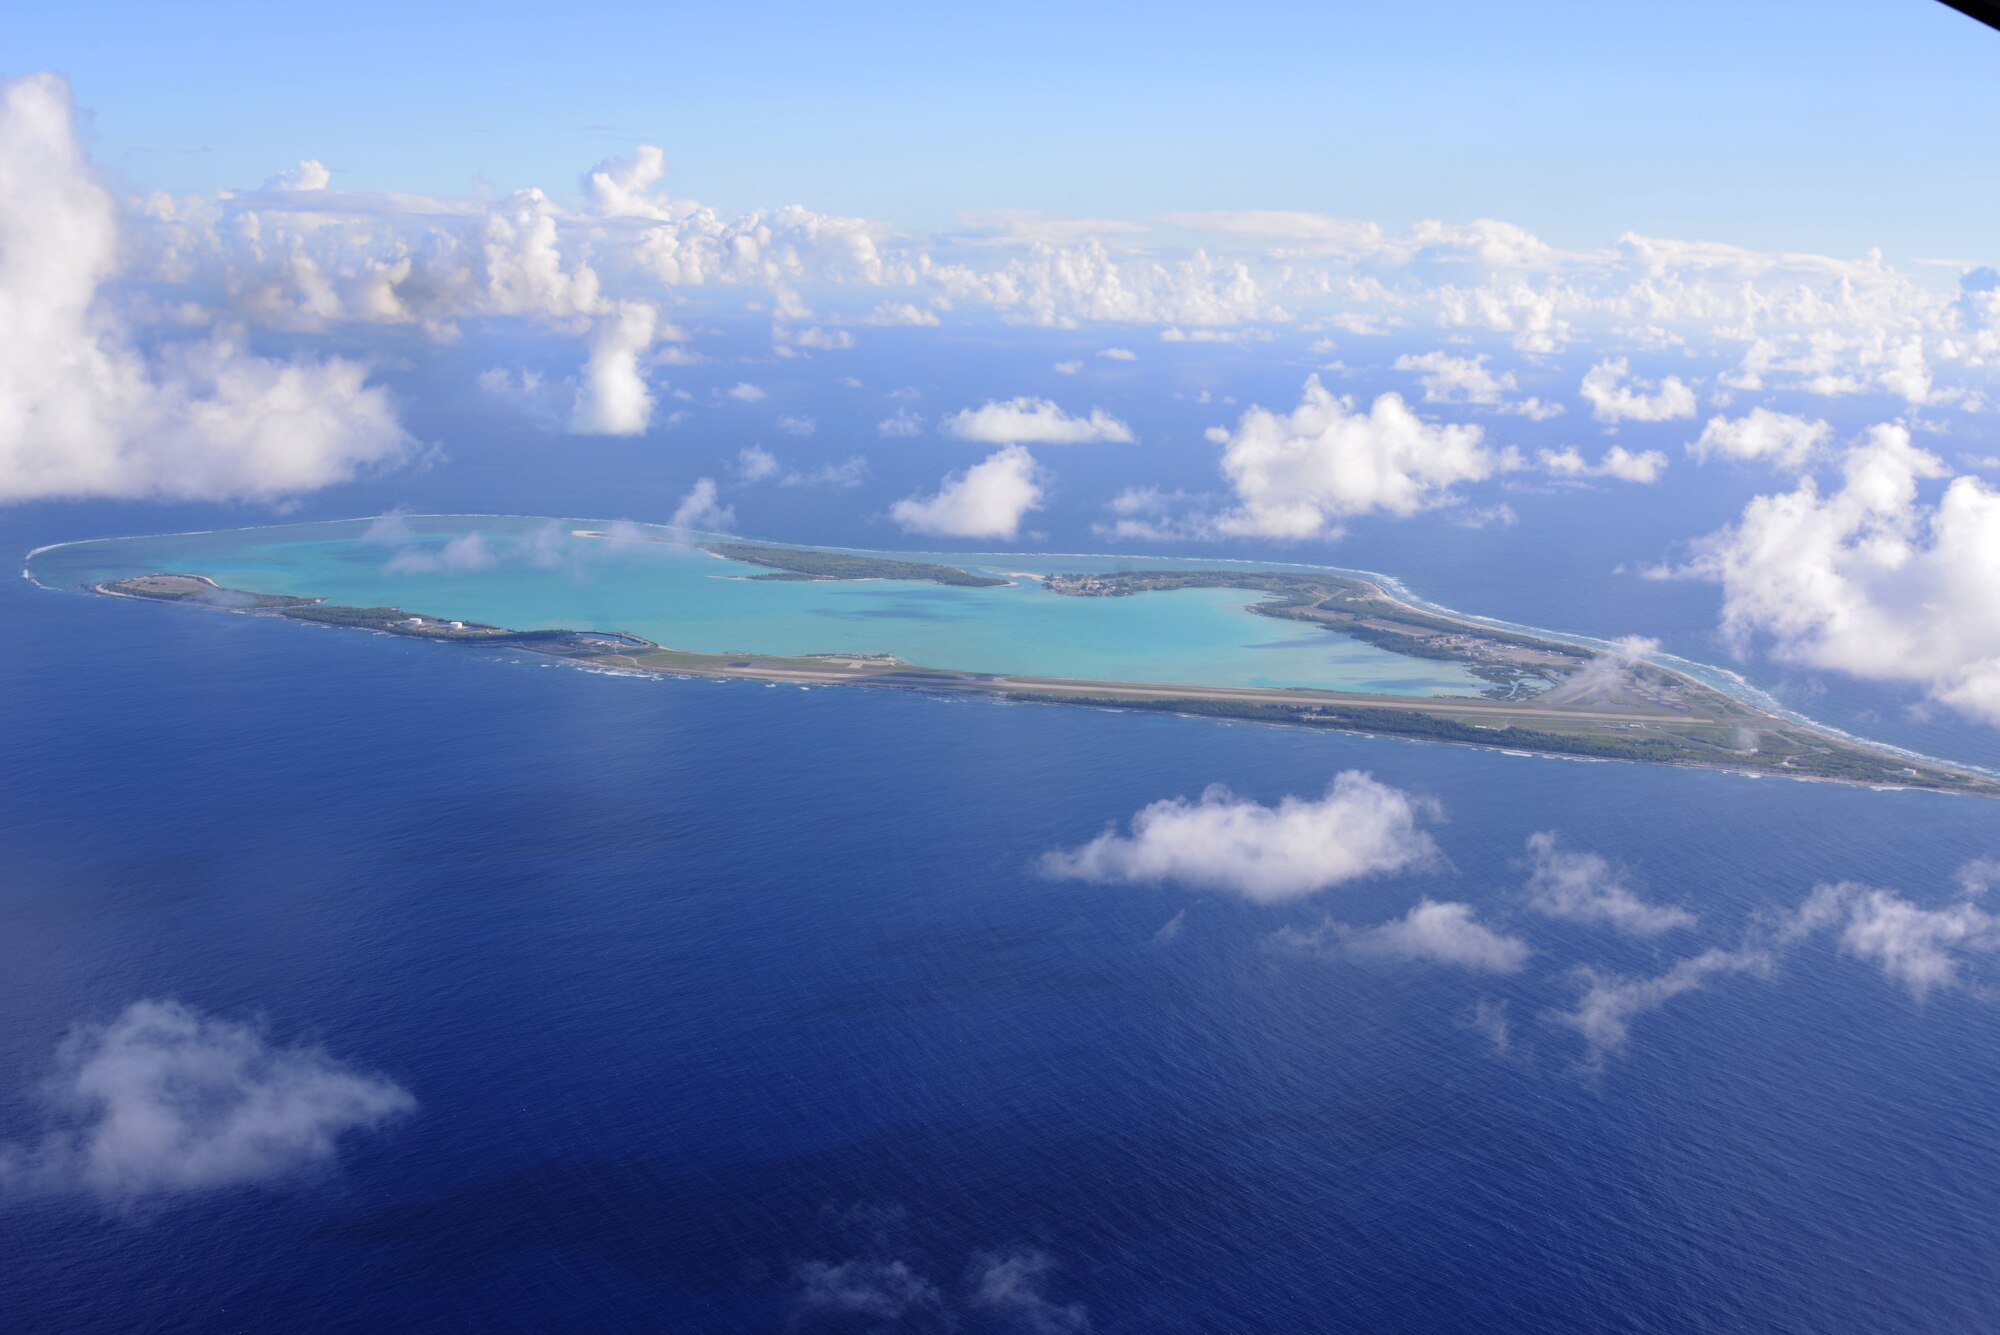 The view from an MC-130H Combat Talon II flying over Wake Island, July 20, 2015.